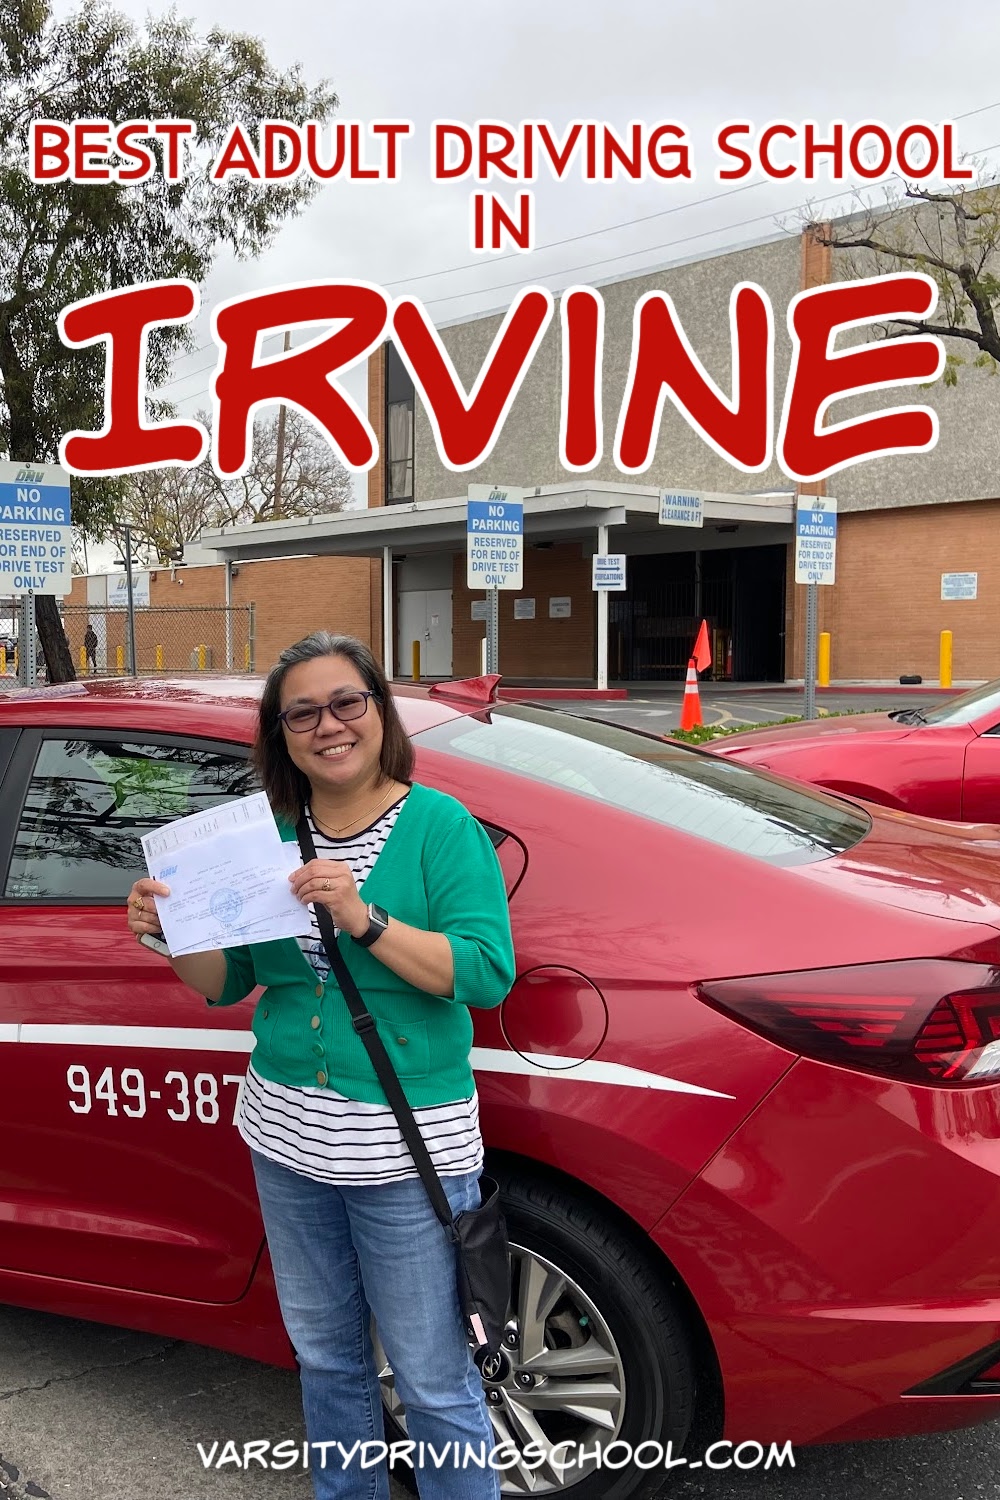 Varsity Driving School is the best adult driving school in Irvine, where adults can get a refresher or learn for the first time.